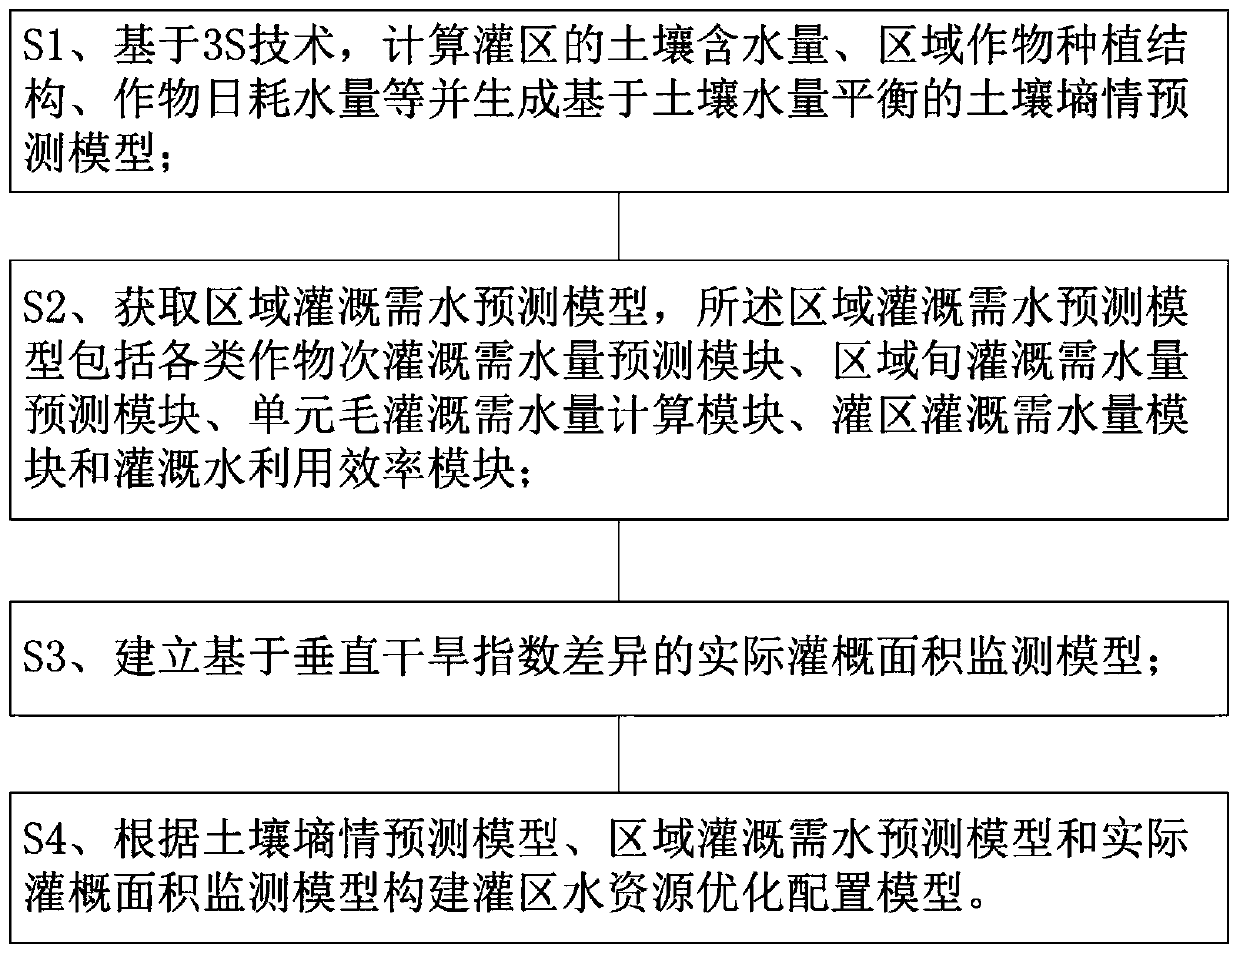 Irrigation district agricultural irrigation water demand decision-making method and system